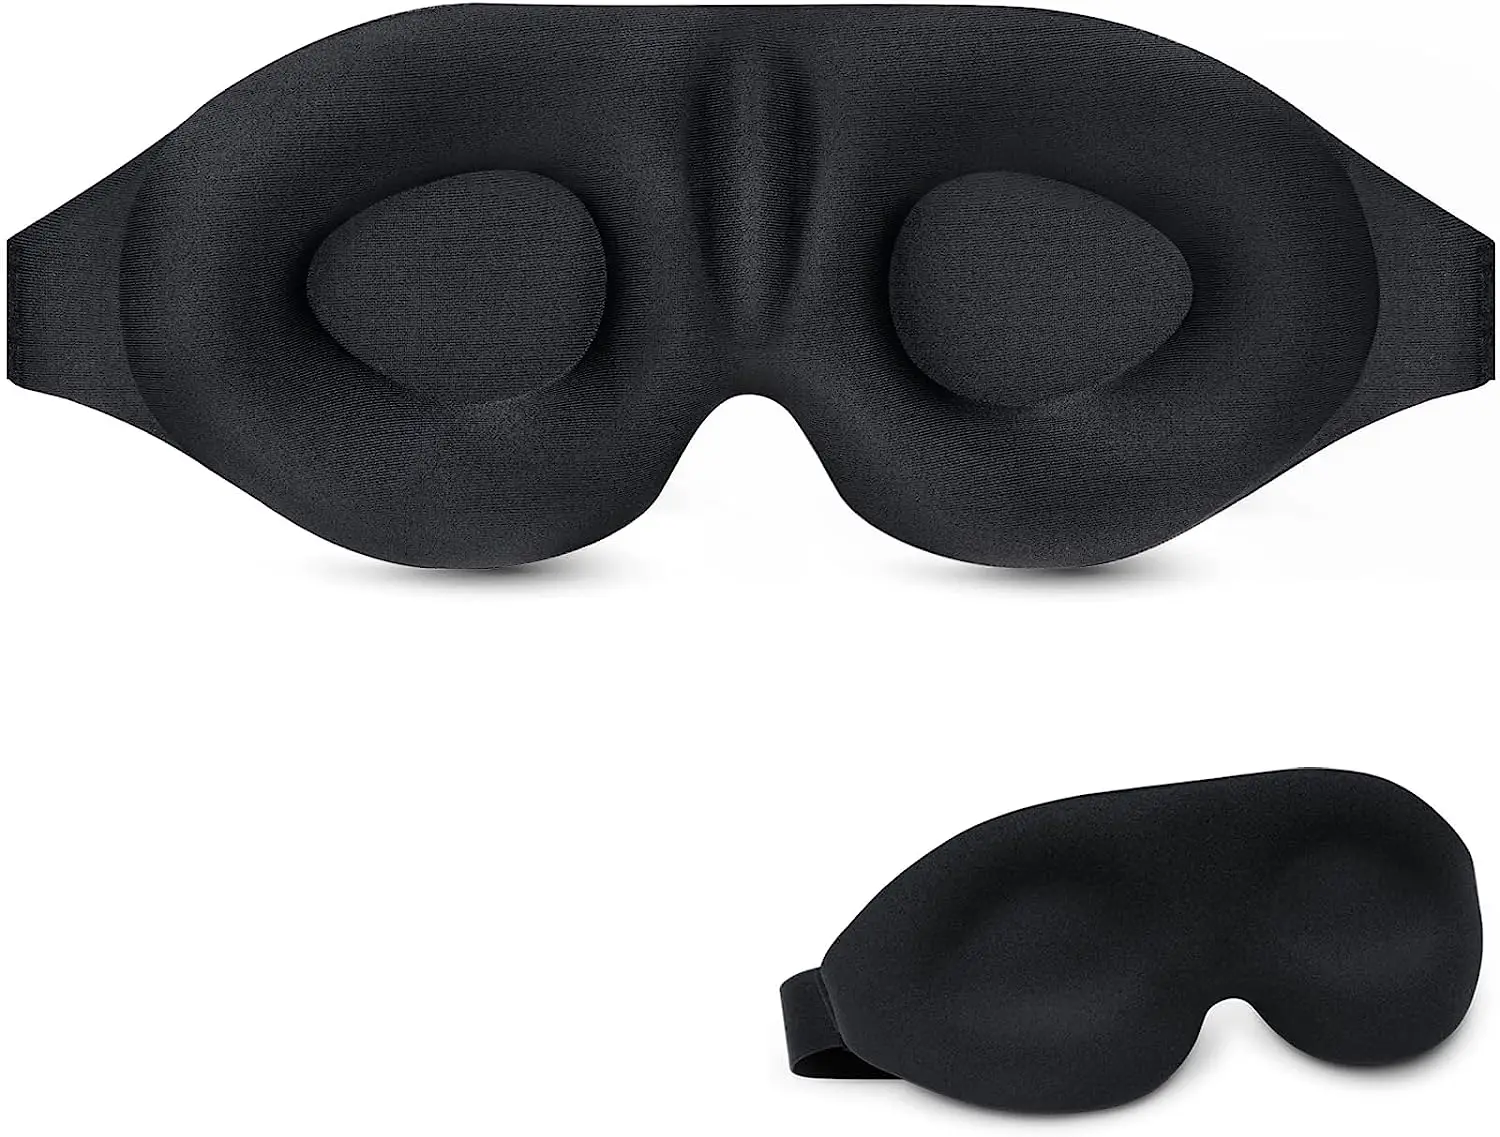 

3D Eye Sleep Mask Contoured Cup Night Blindfold Light Blocking Eye Cover Molded Shade with Adjustable Strap for Travel